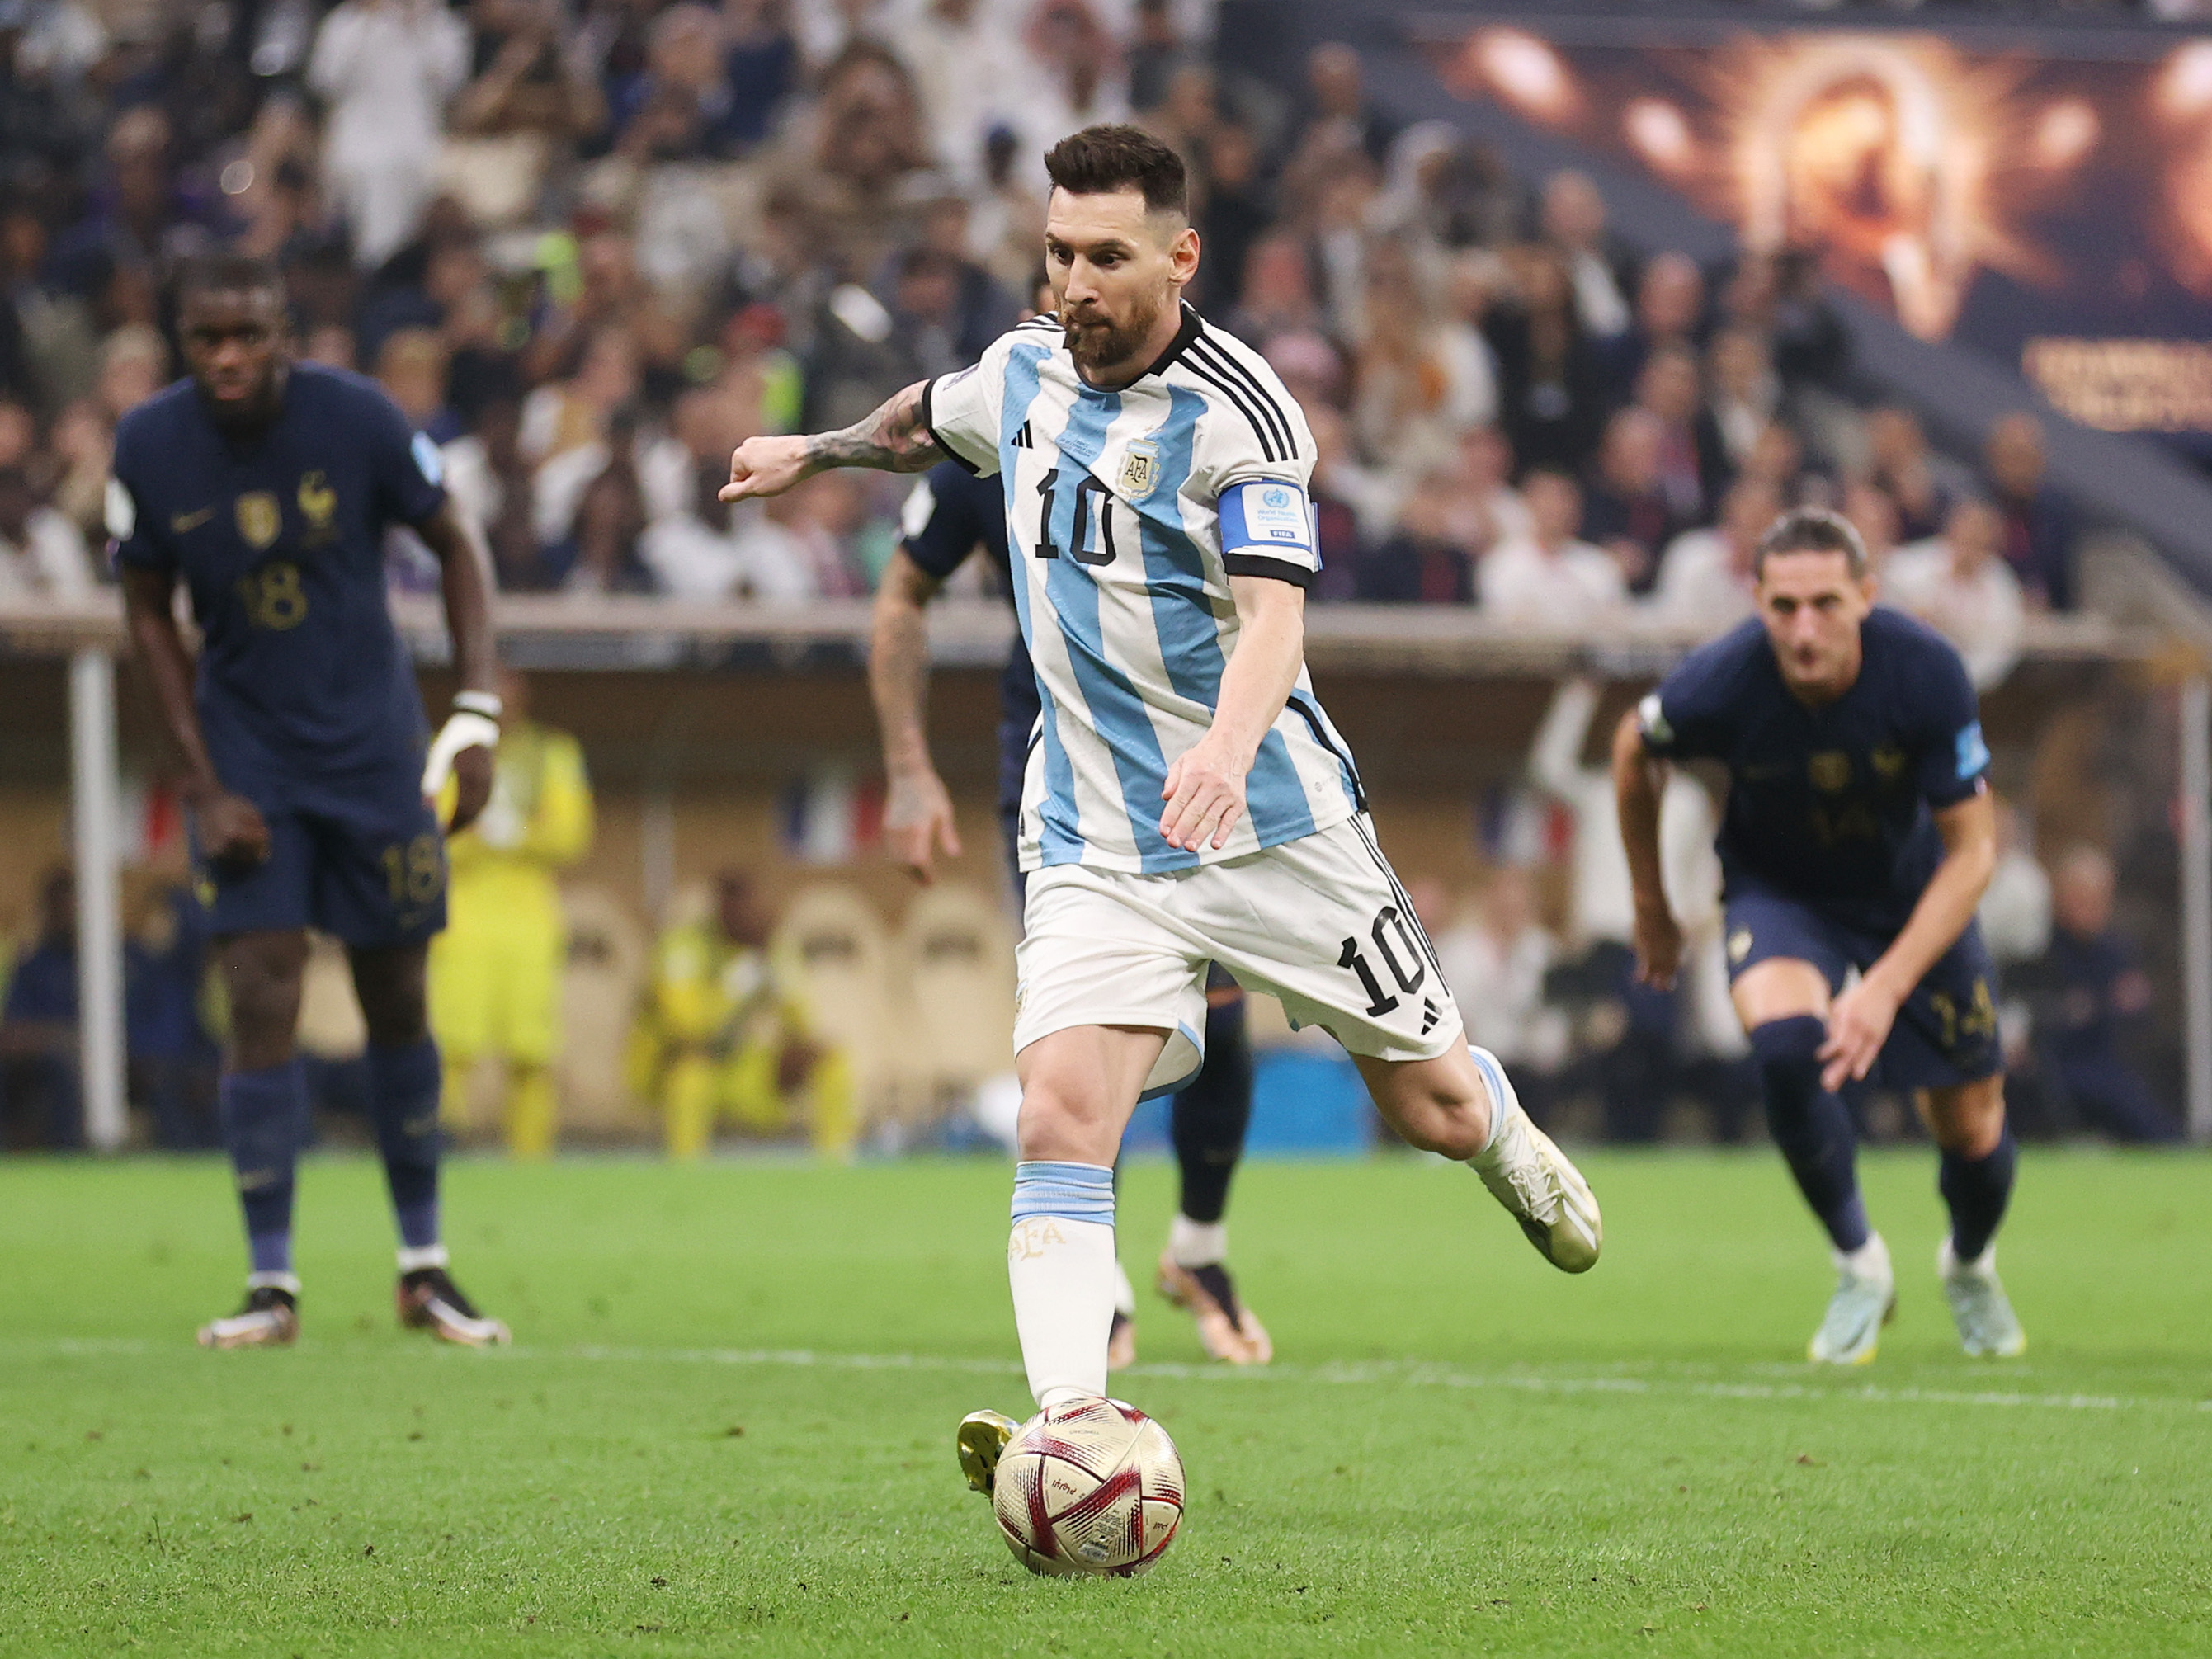 Finally Lionel Messi Leads Argentina Over France To Win A World